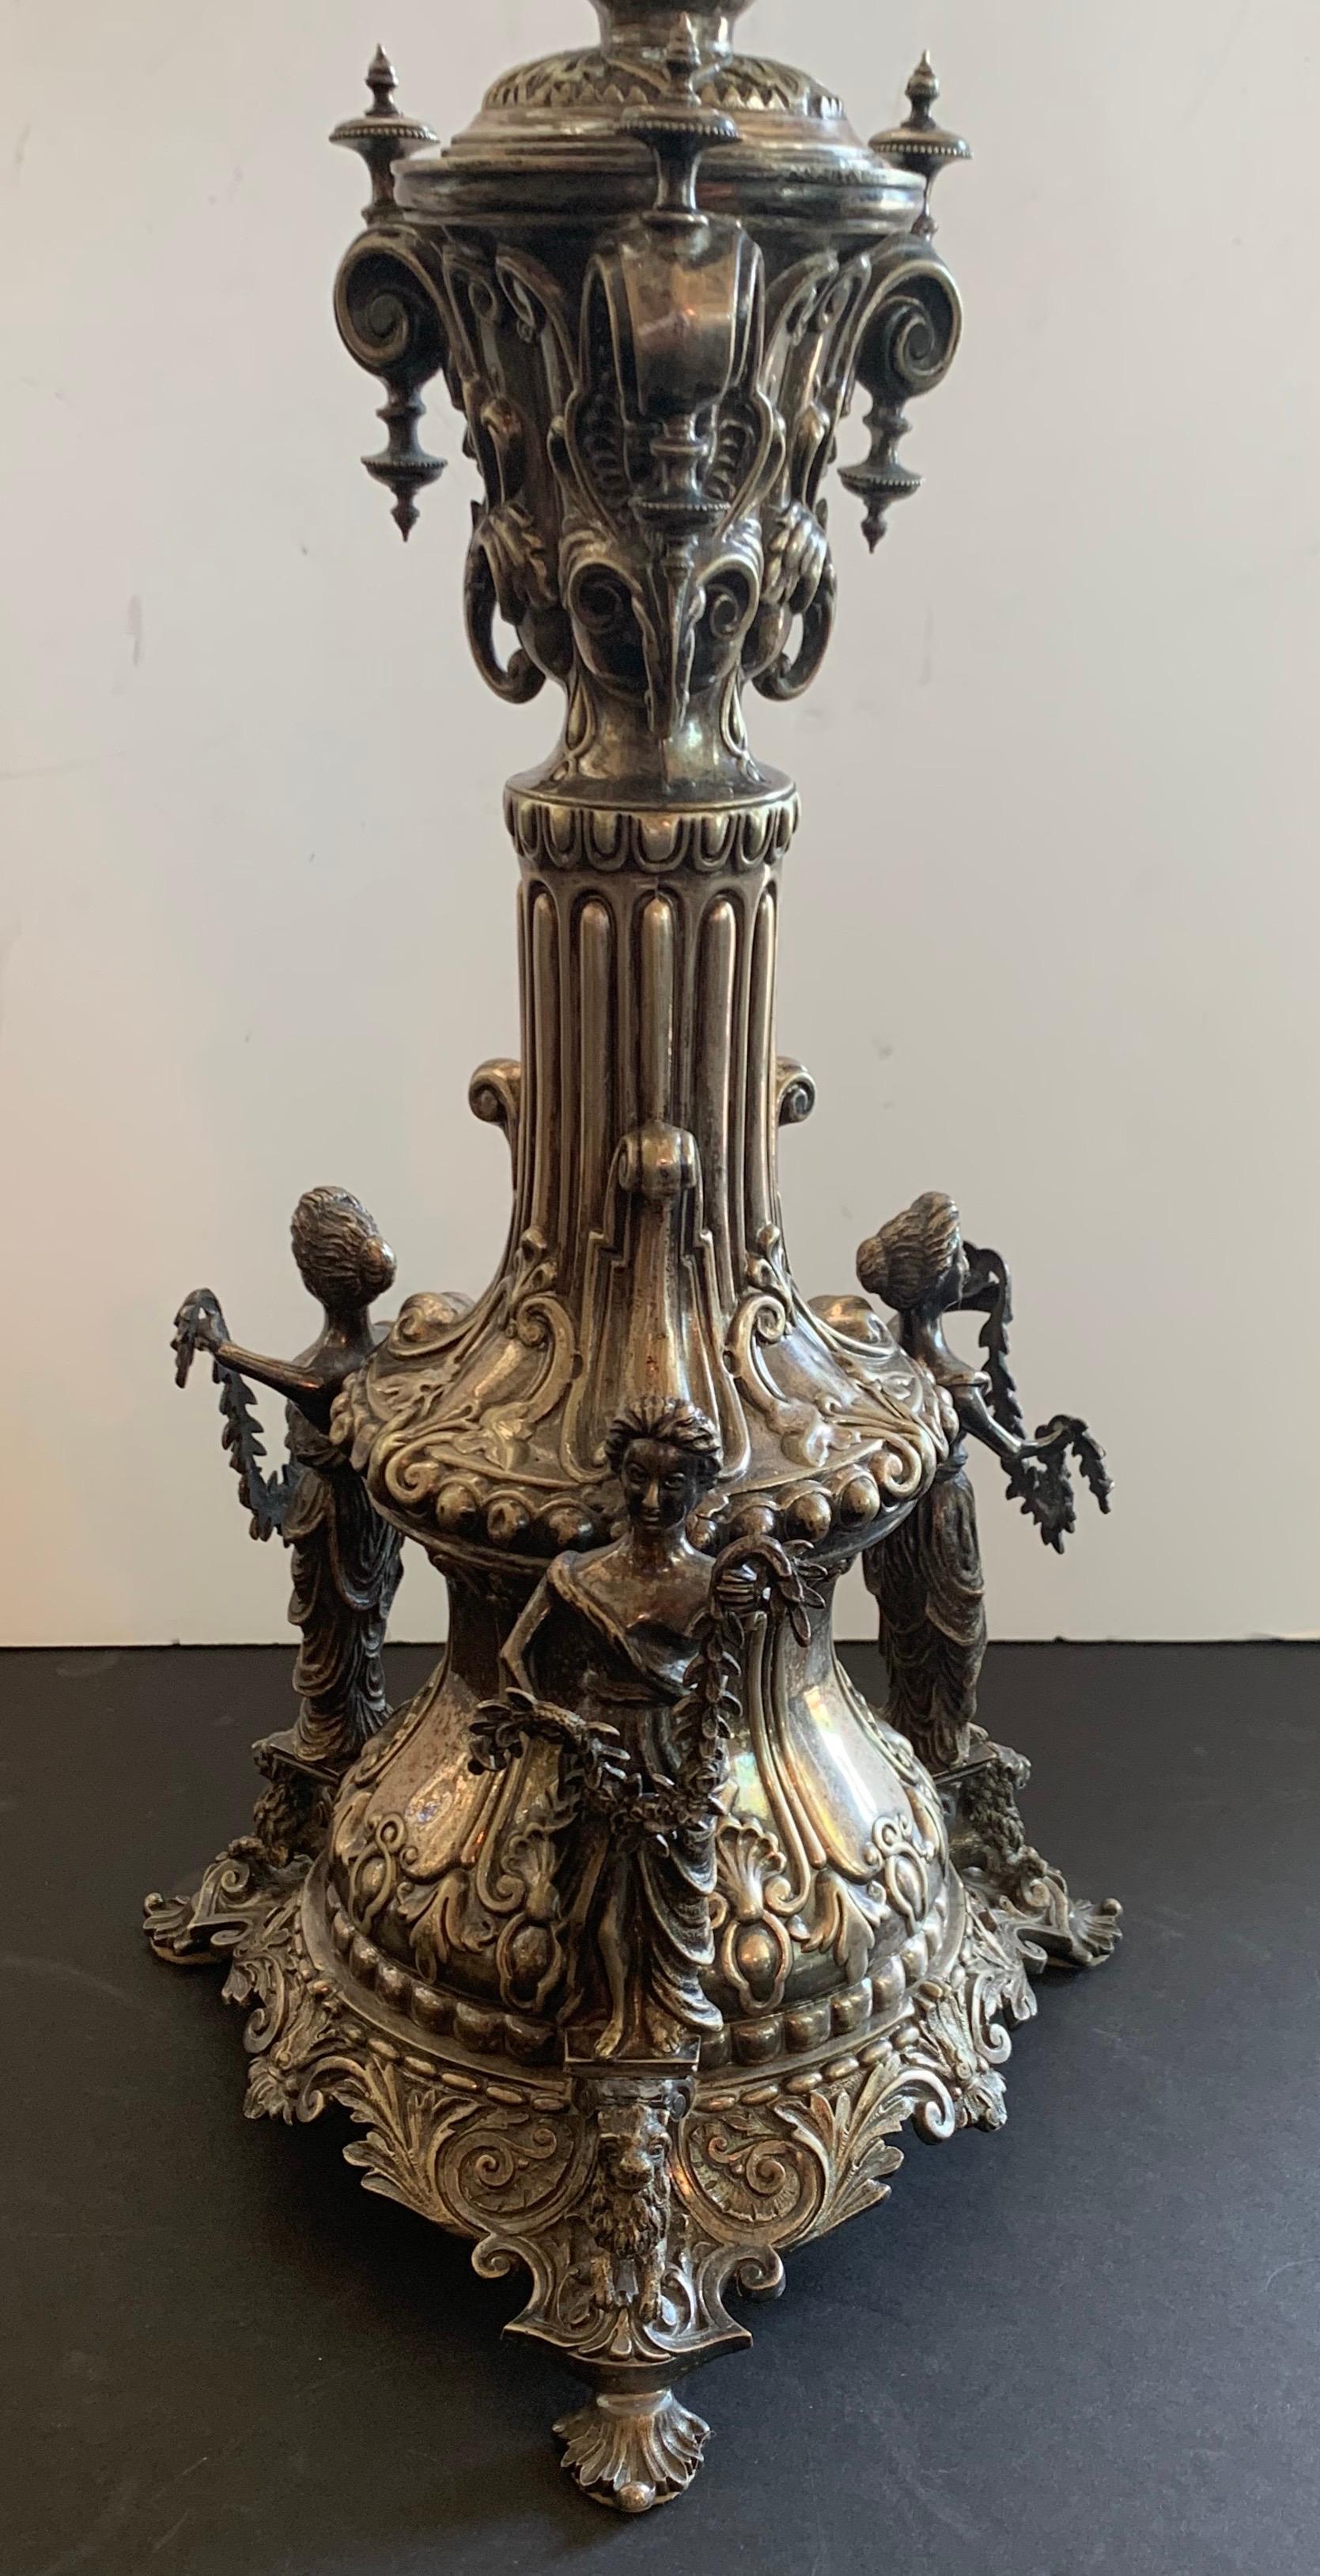 A monumental fine neoclassical / Regency 3 figure English silver plated epergne with 6 candelabra arms
in the manner of Sheffield 31